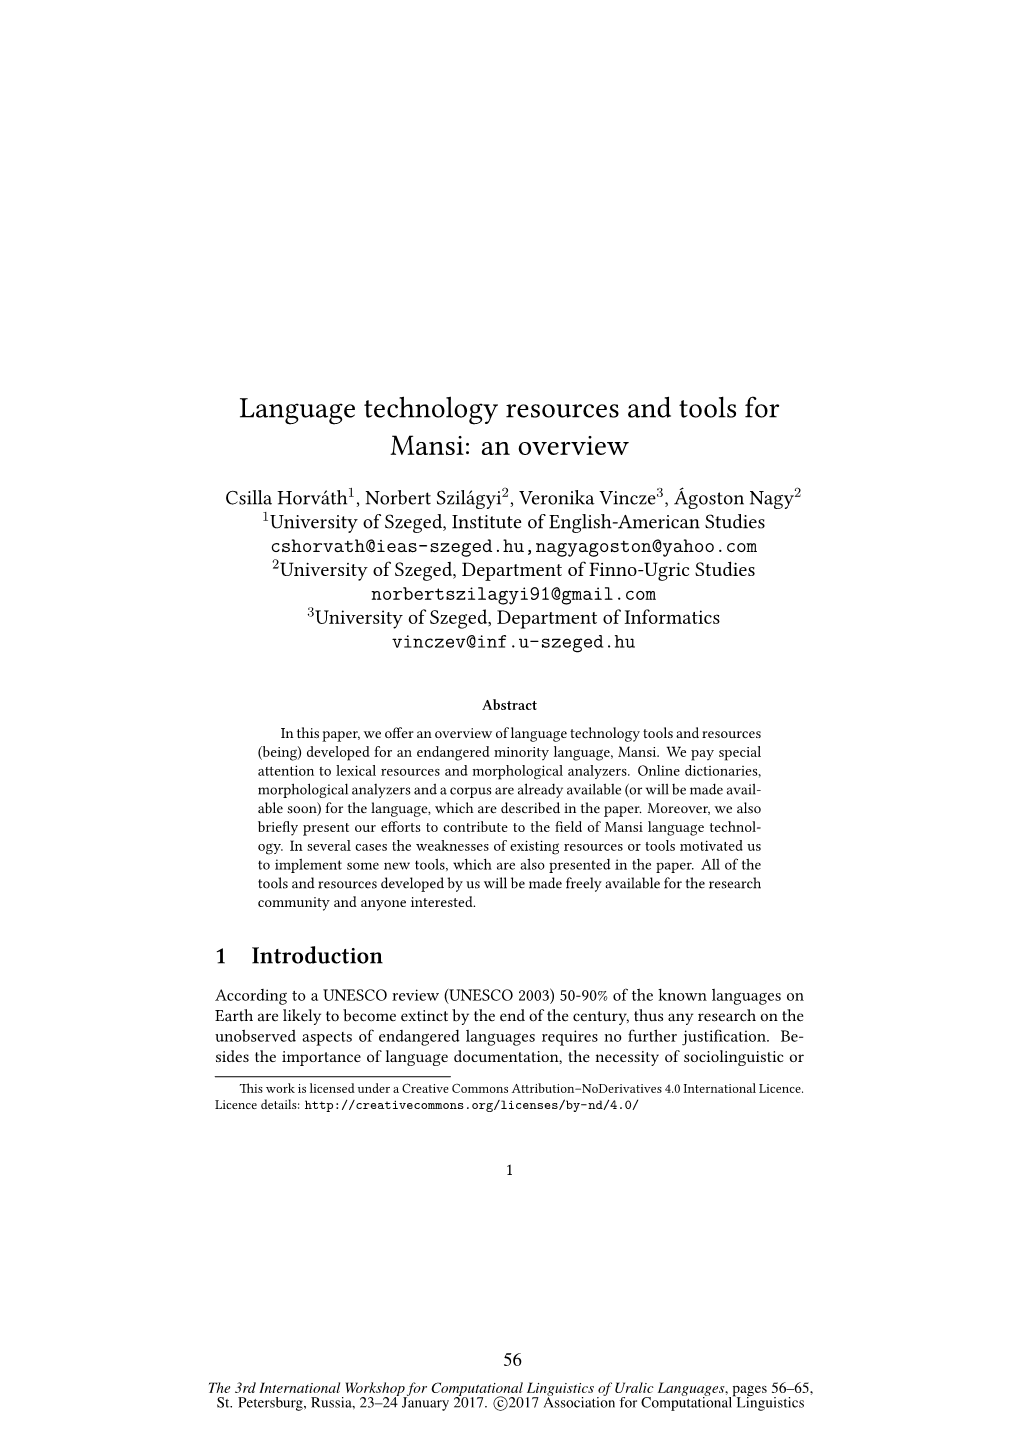 Language Technology Resources and Tools for Mansi: an Overview